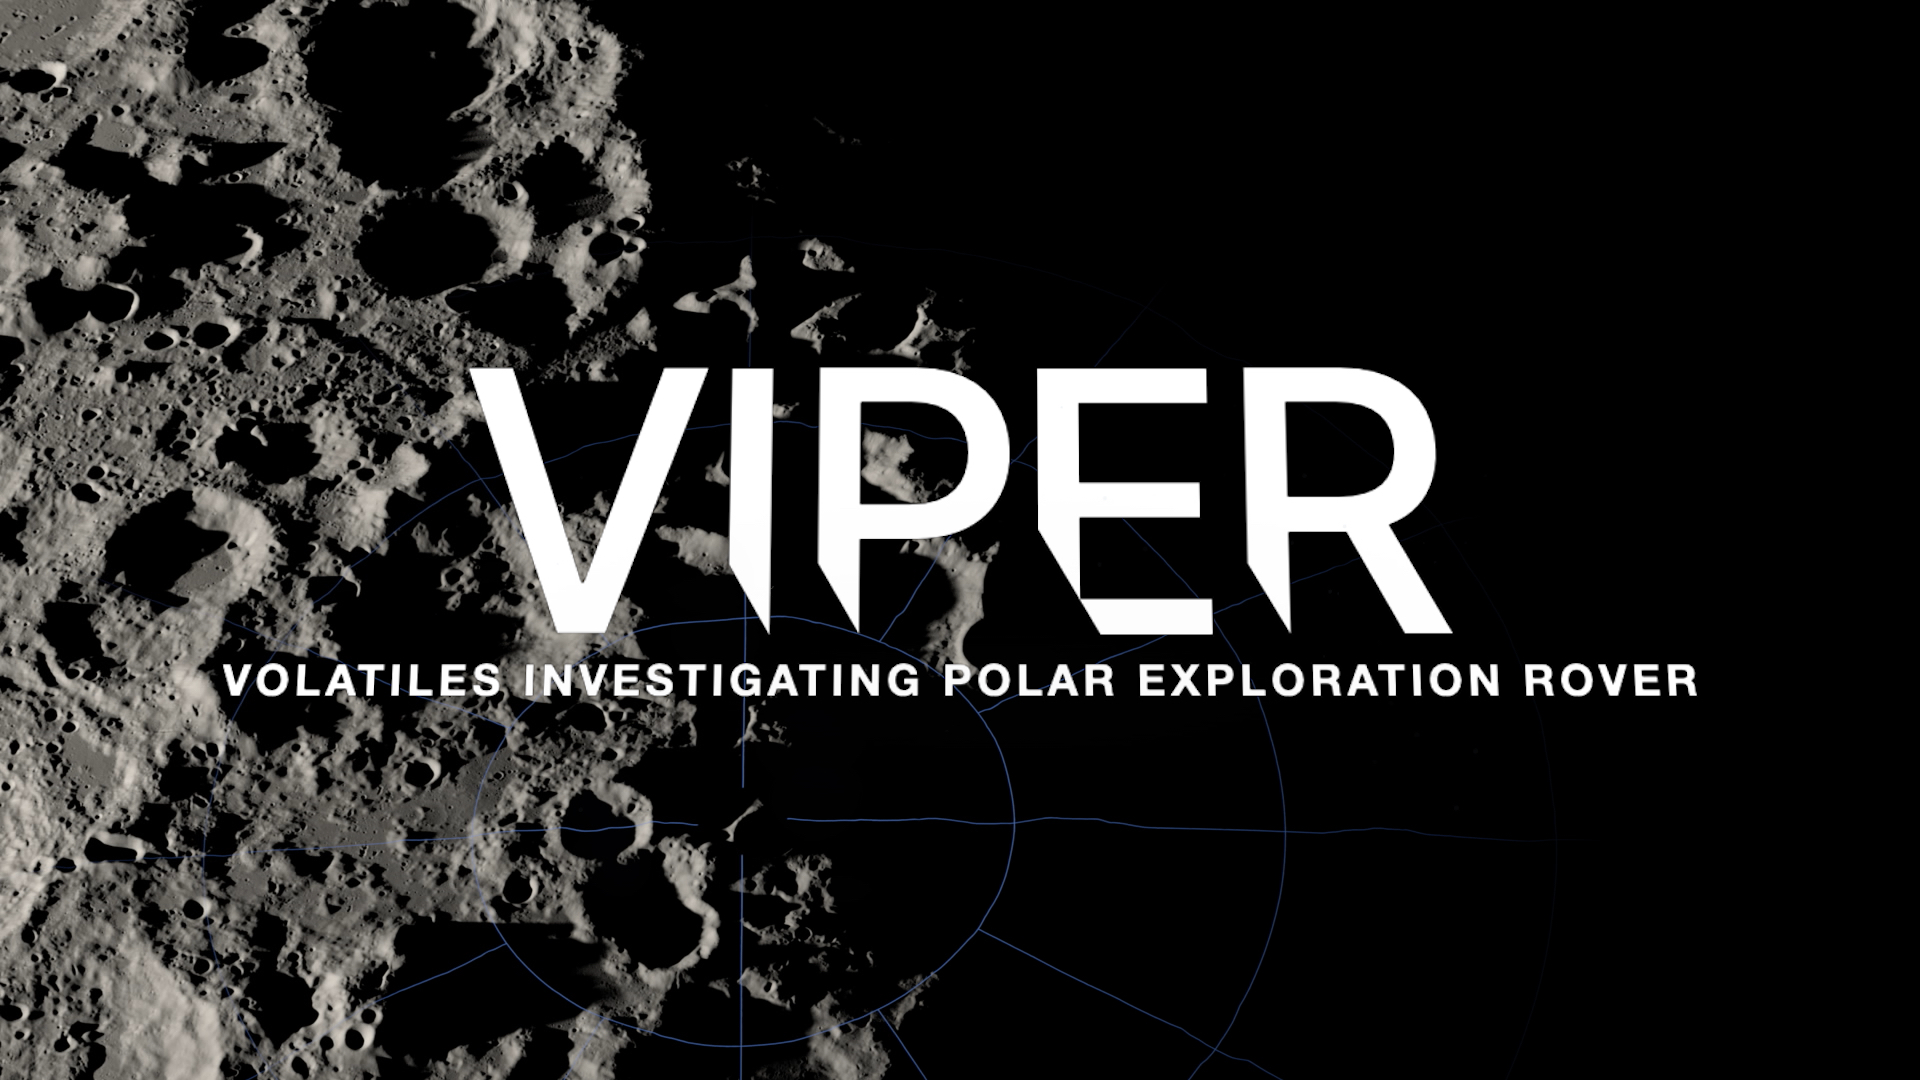 FULL VIDEO: The VIPER team announces that its rover will be sent to the Nobile region near the Moon's South Pole to carry out its mission.  Watch this video to learn more.Music Provided by Universal Production Music: “The Butterfly Effect” – David Thomas ConnollyThis video can also be viewed on YouTube.